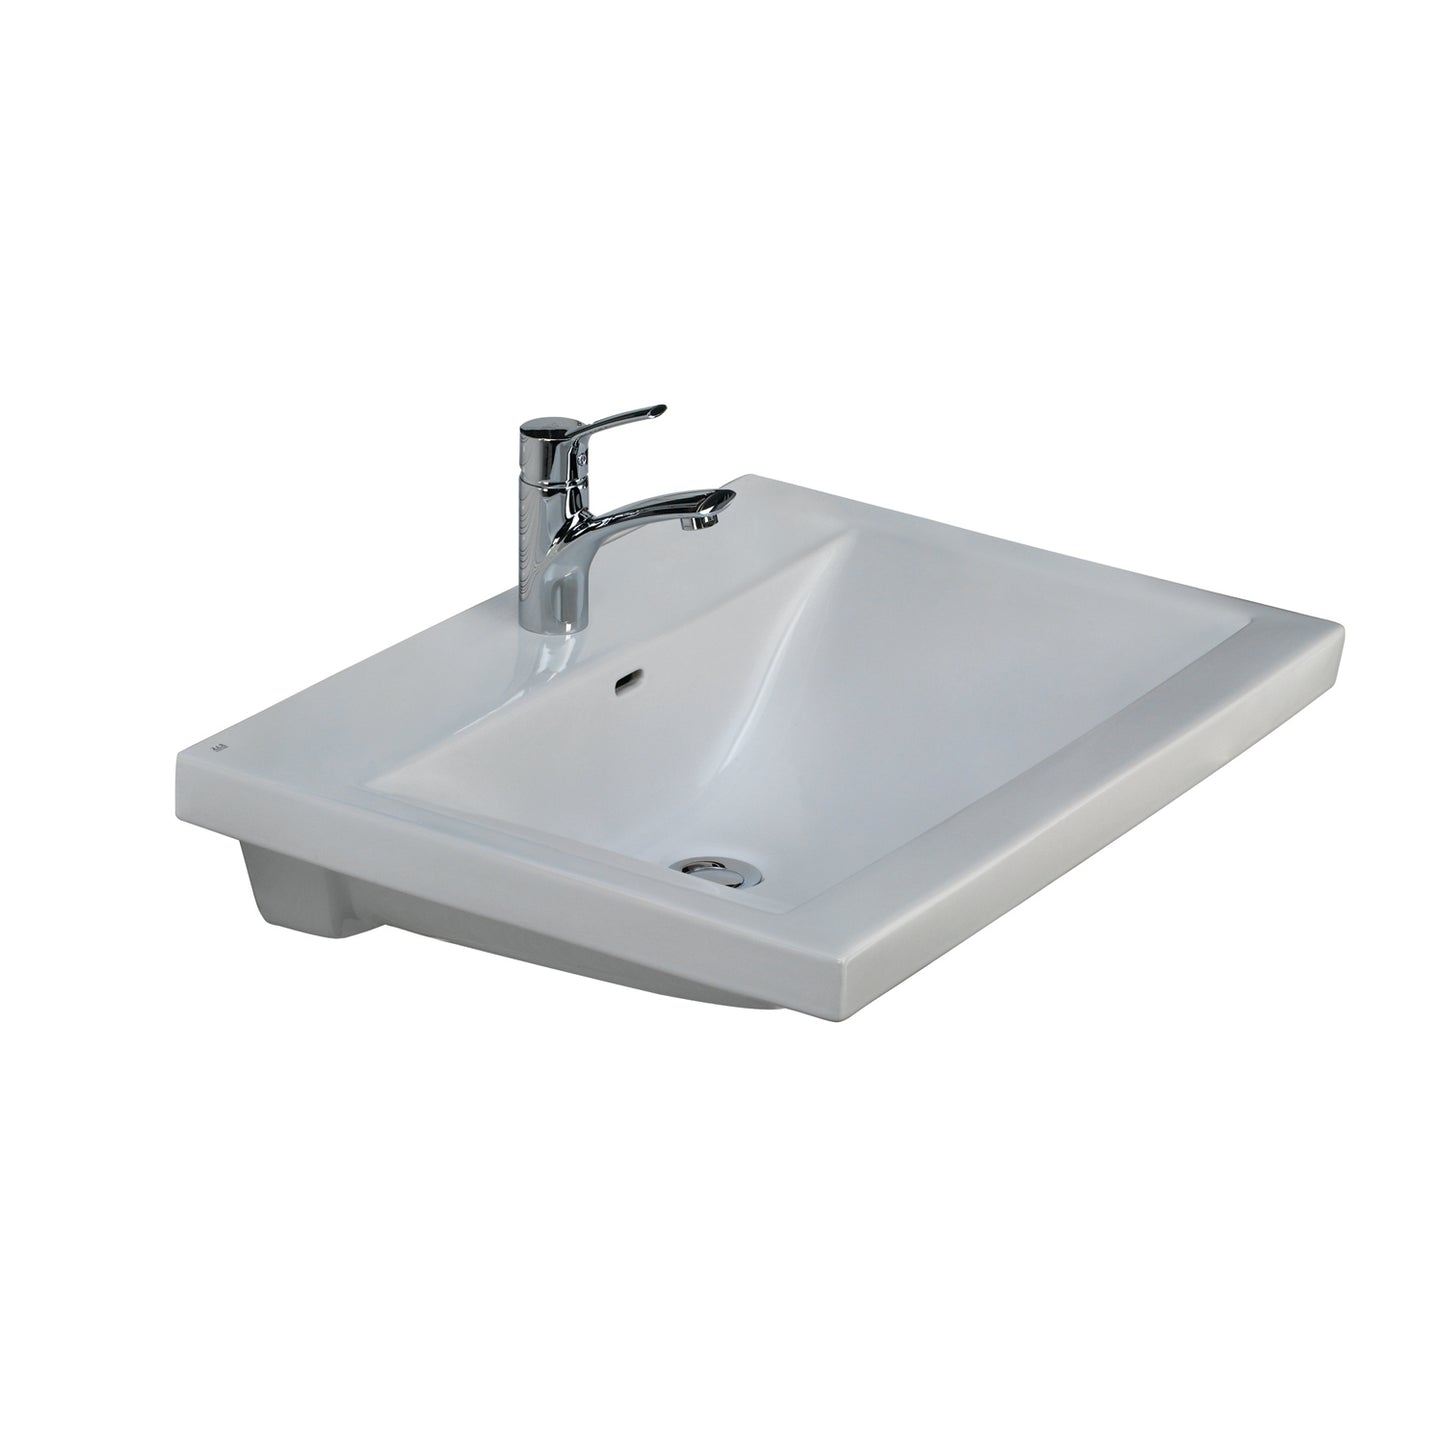 Mistral 650 Wall Hung Bathroom Sink 4" Centerset White